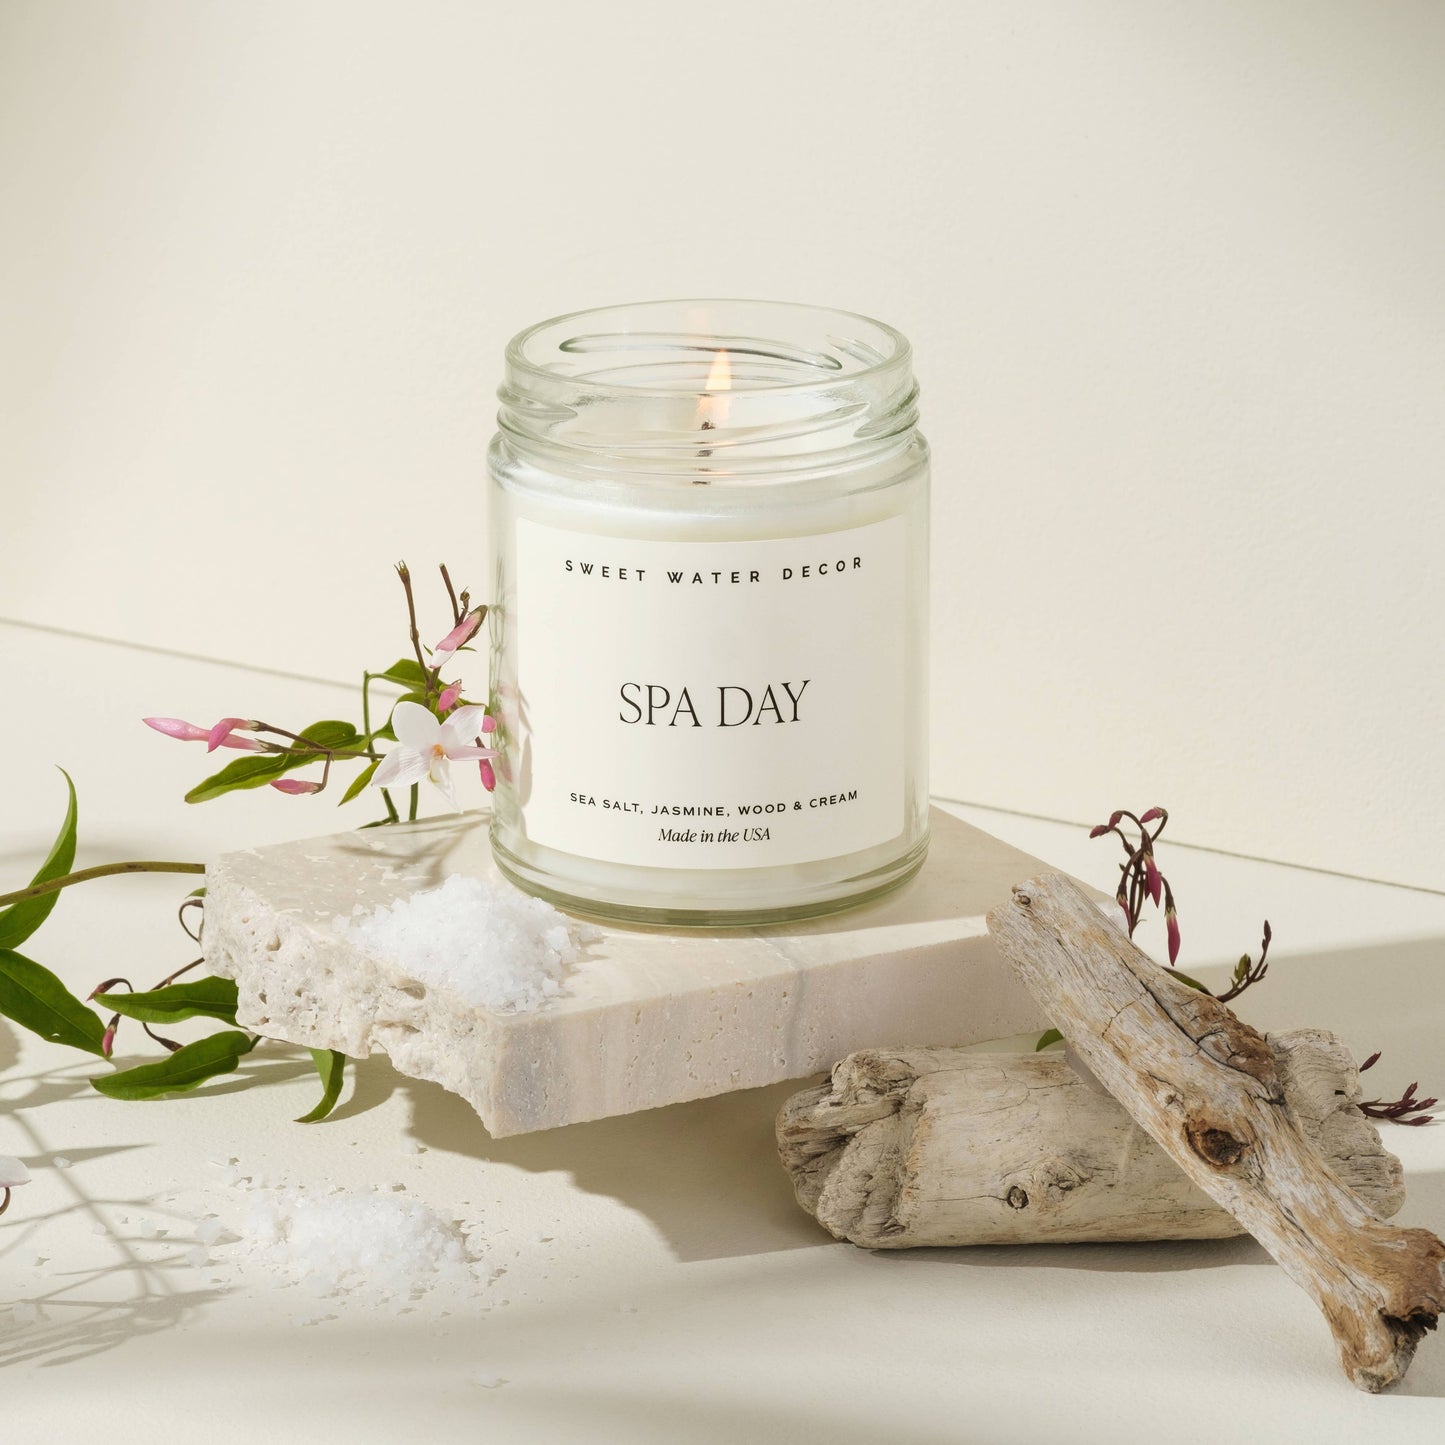 Spa Day 9 oz Soy Candle - Home Decor & Gifts